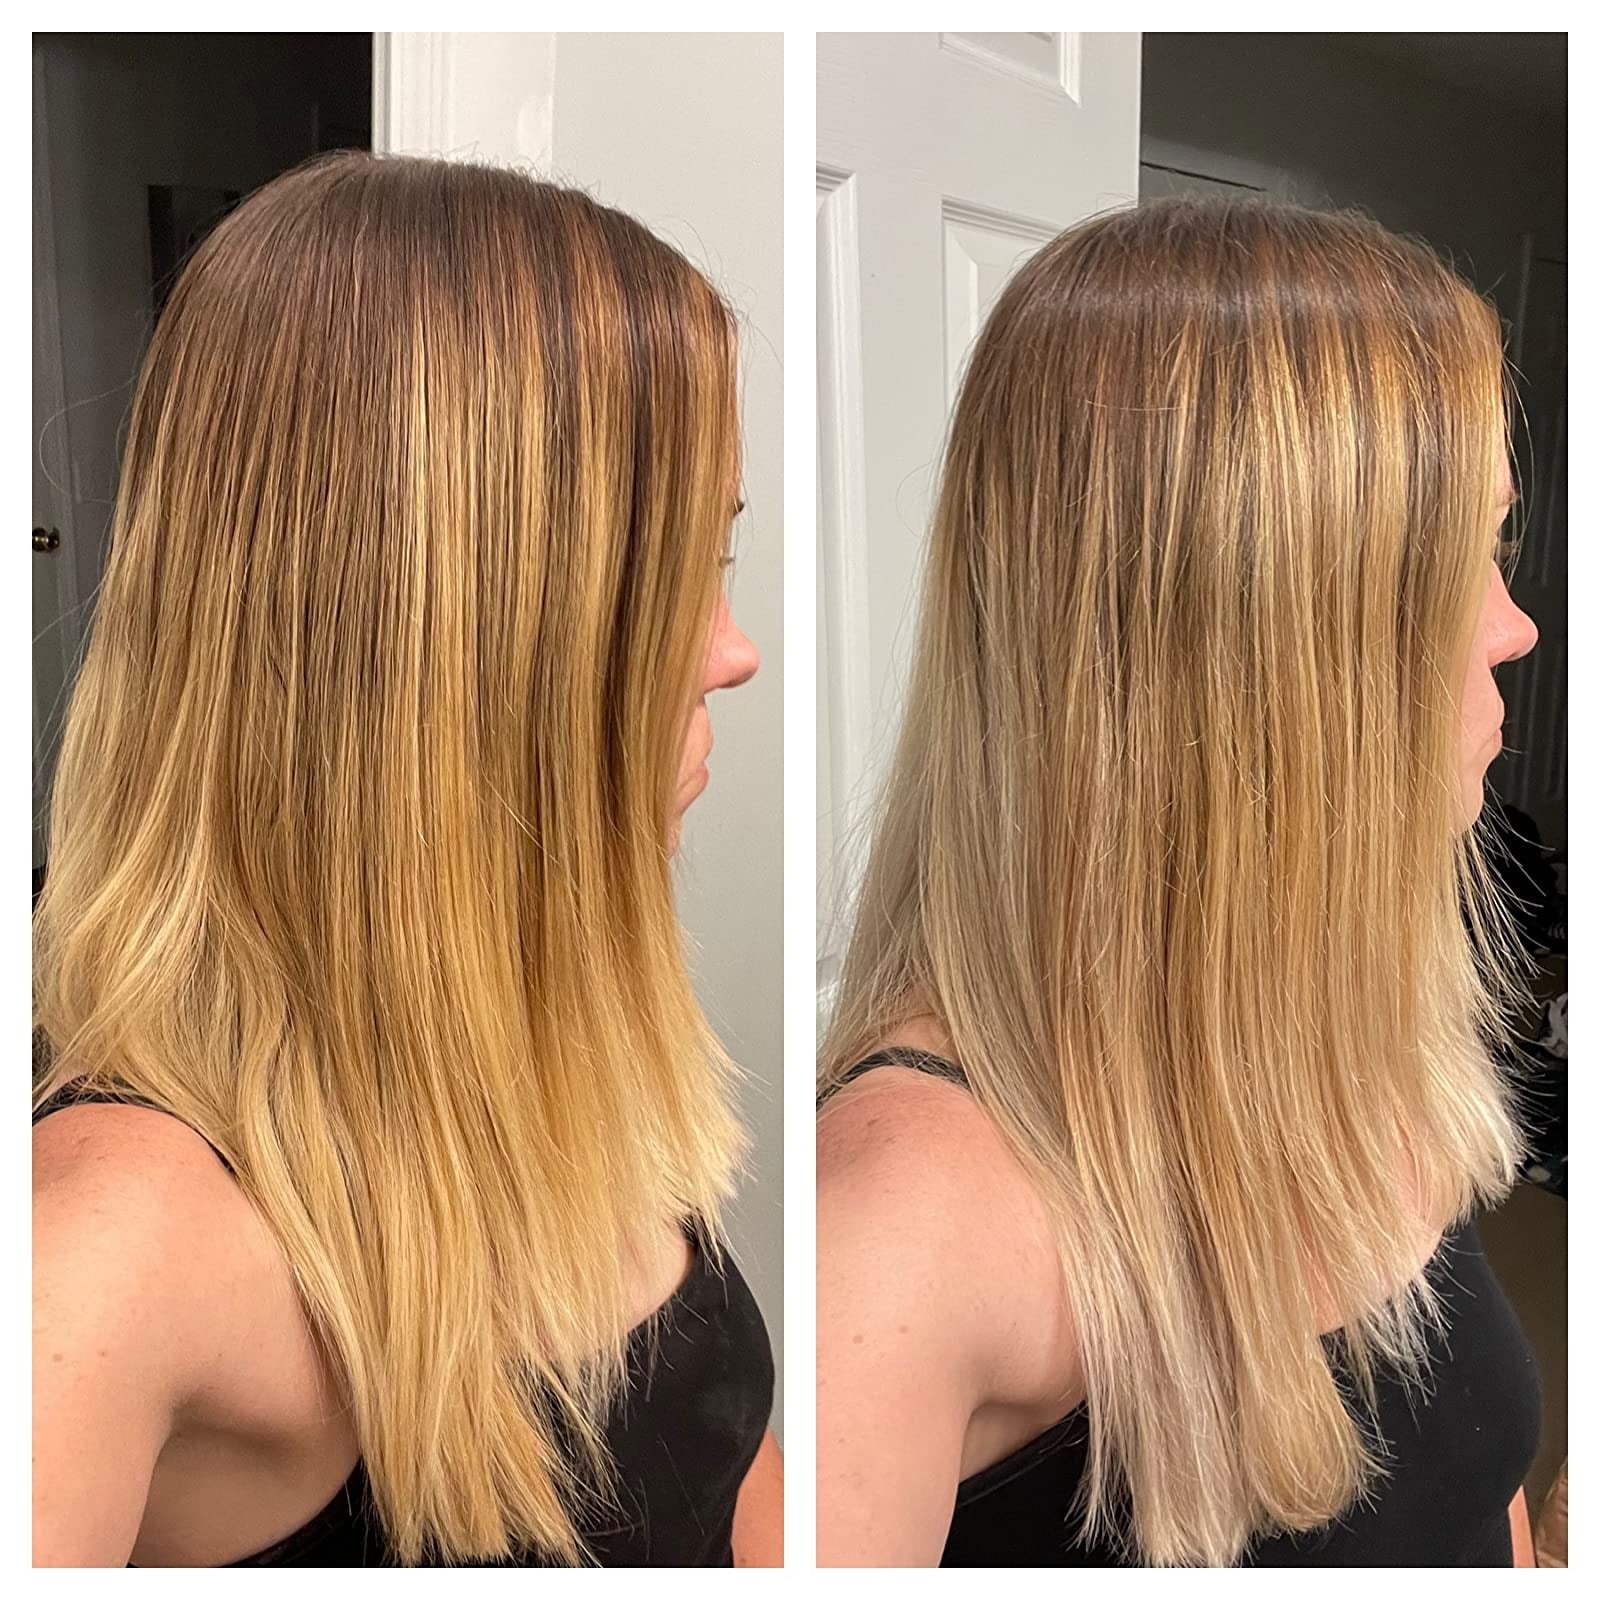 on left, reviewer with mid-length brassy blonde hair. on right, same reviewer with more bleach-blonde strands after using the purple shampoo